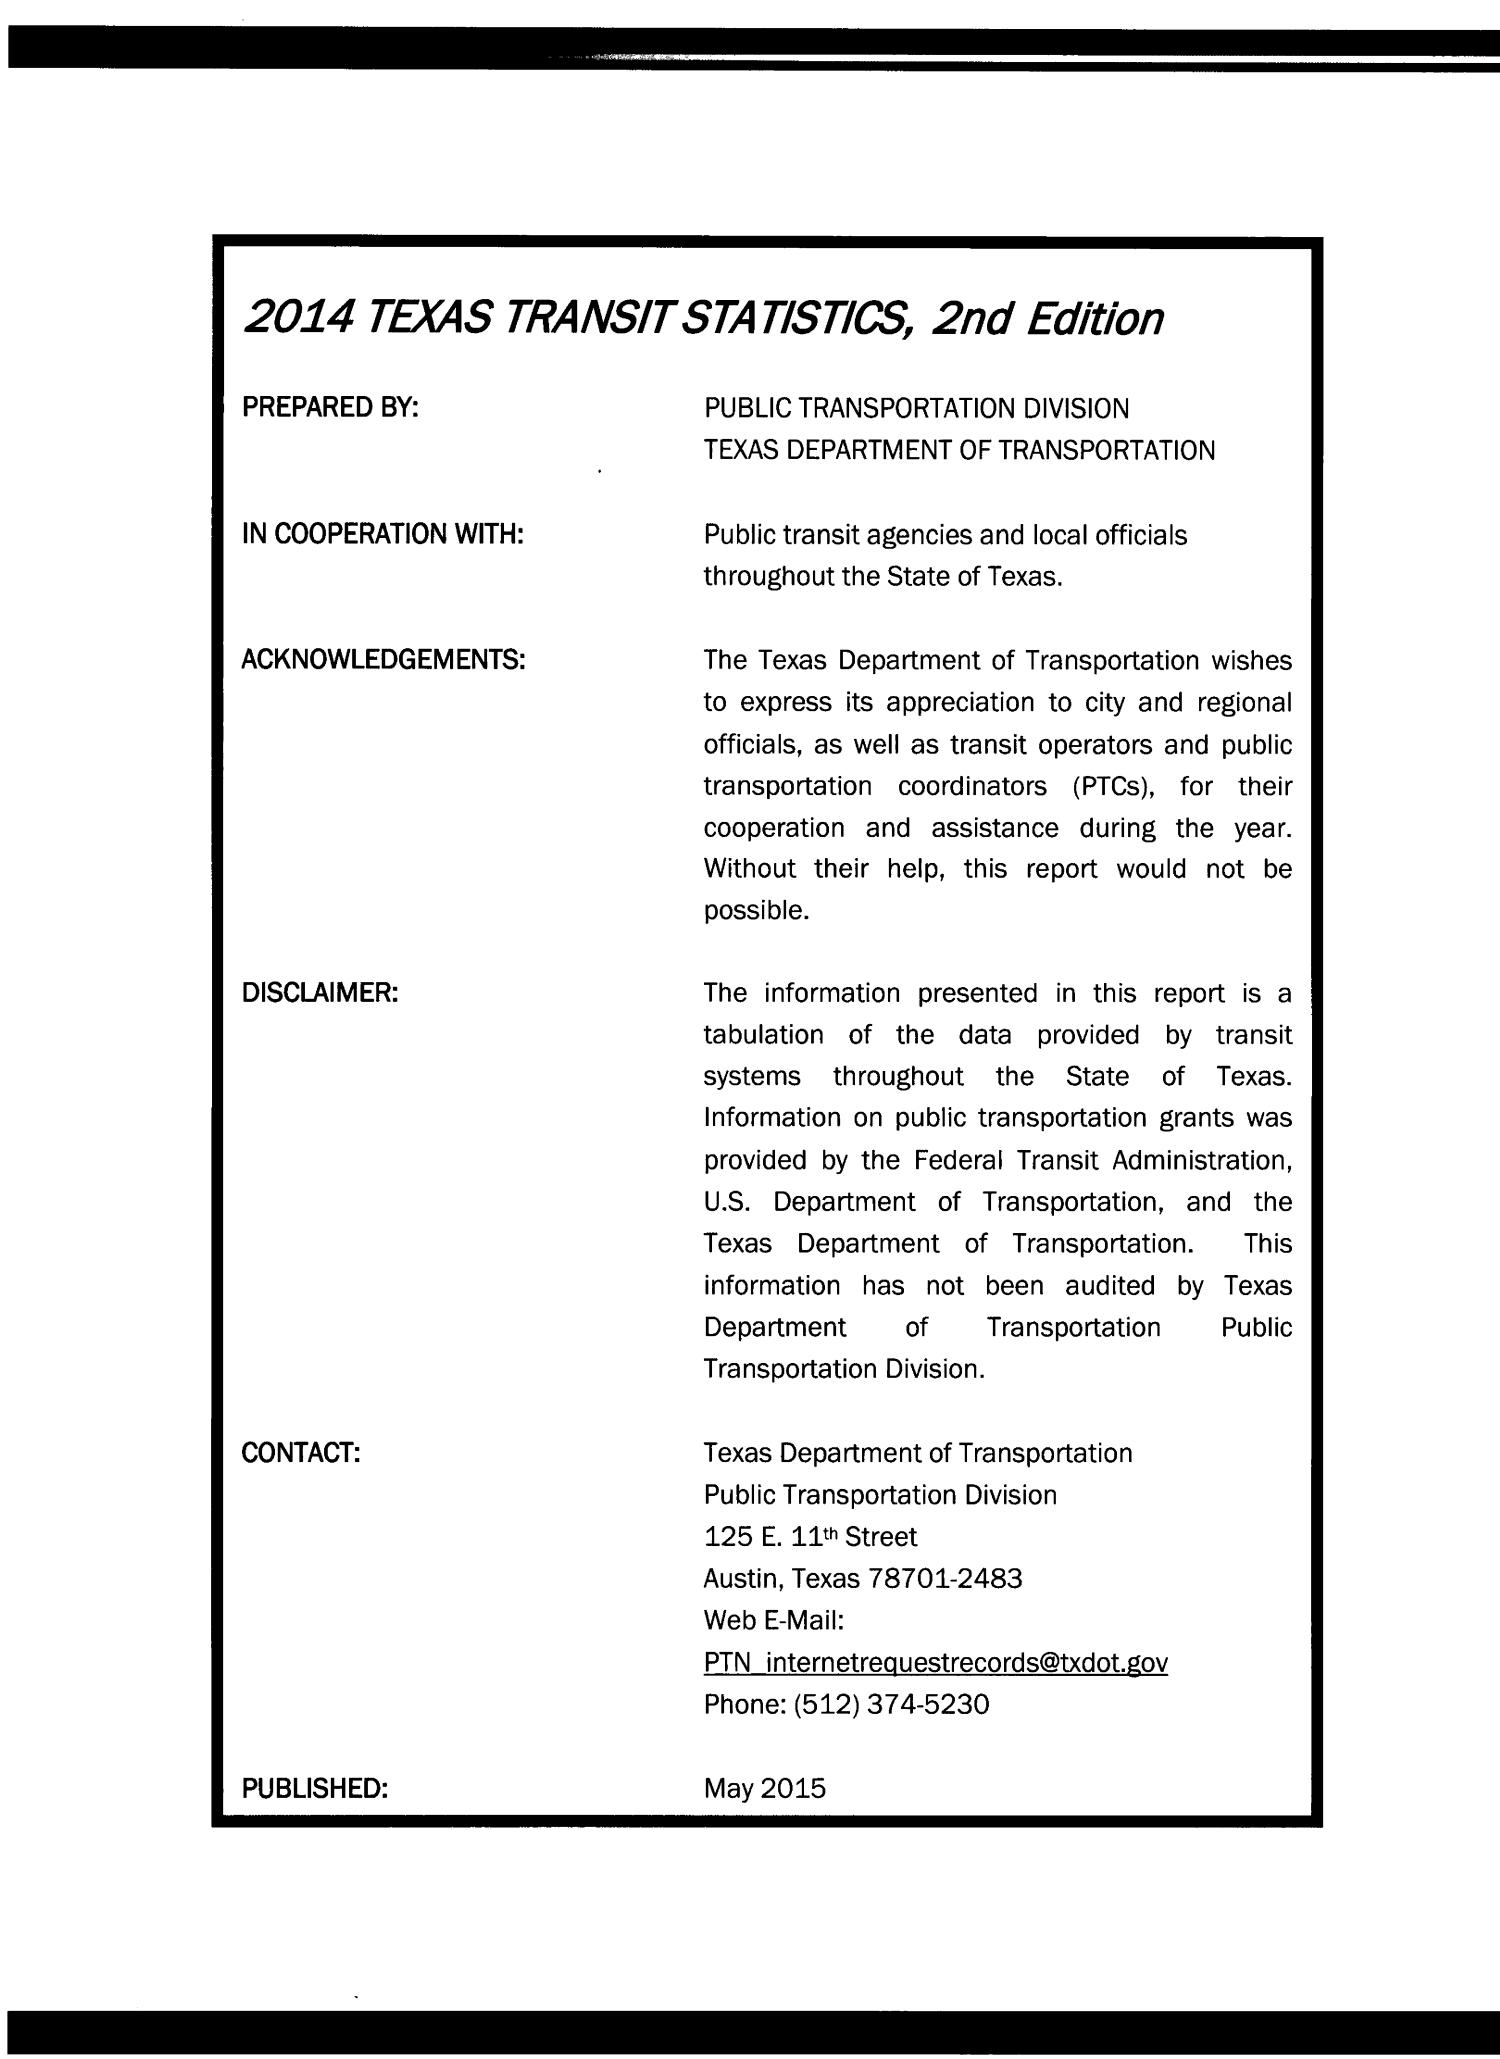 Texas Transit Statistics: 2014
                                                
                                                    Inside Front Cover
                                                